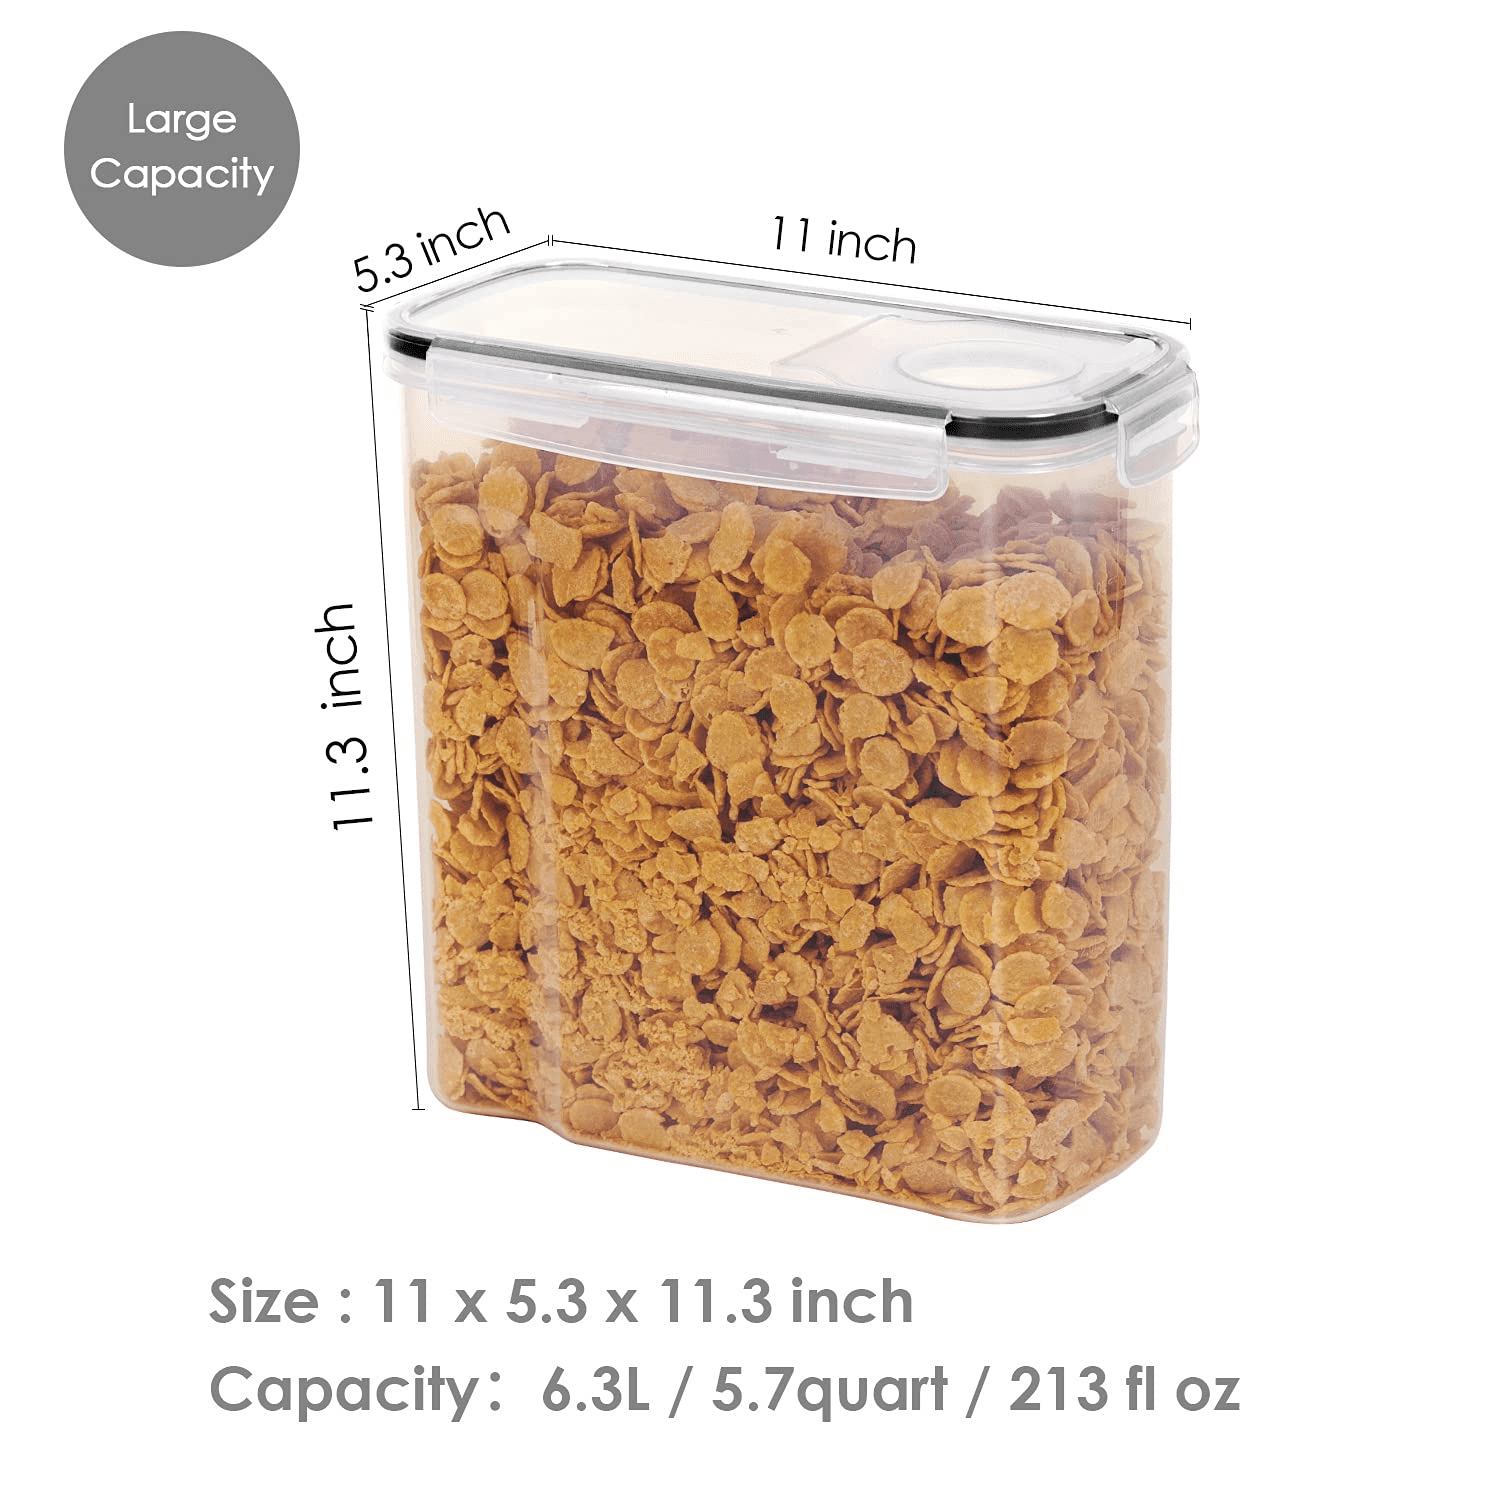 Walmart Ada - Life hack #231: Use this cereal storage container as